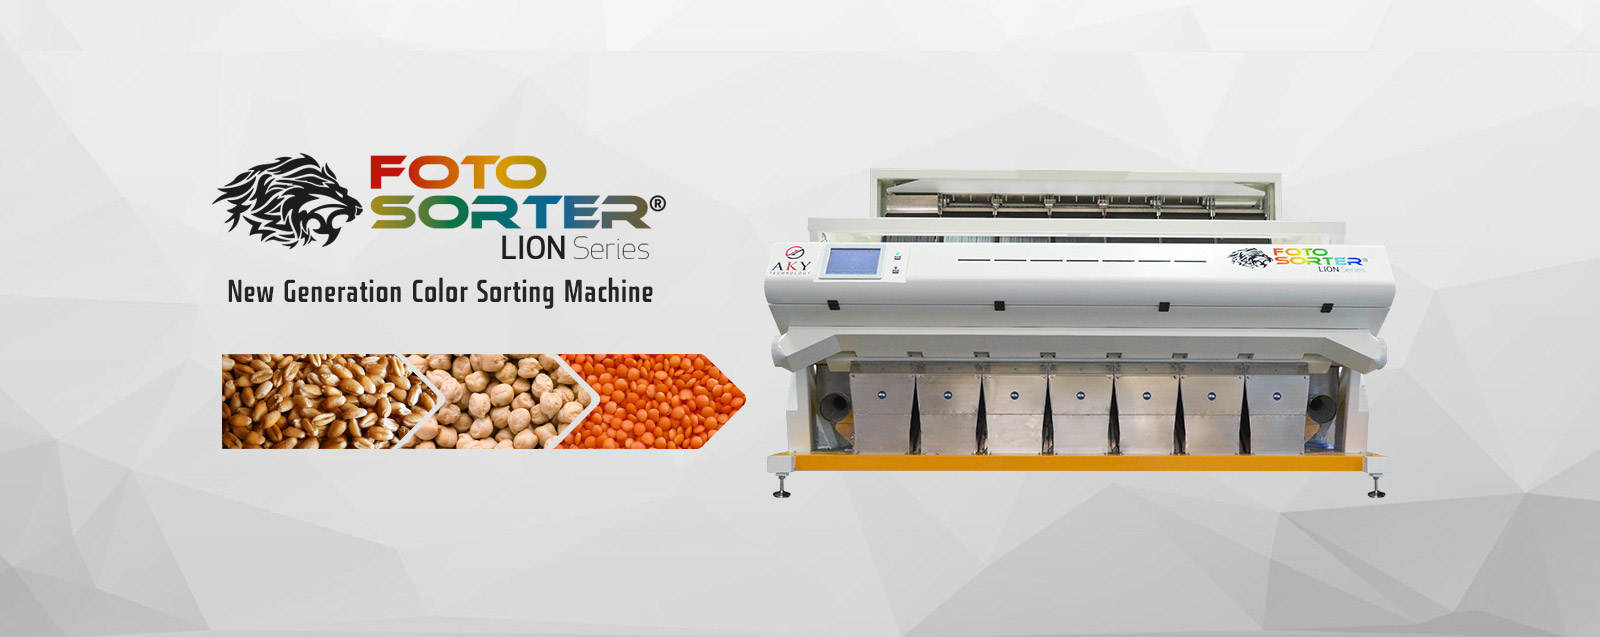 Meet AKY Technology’s Fotosorter Lion Series Optical Color Sorting Machine 